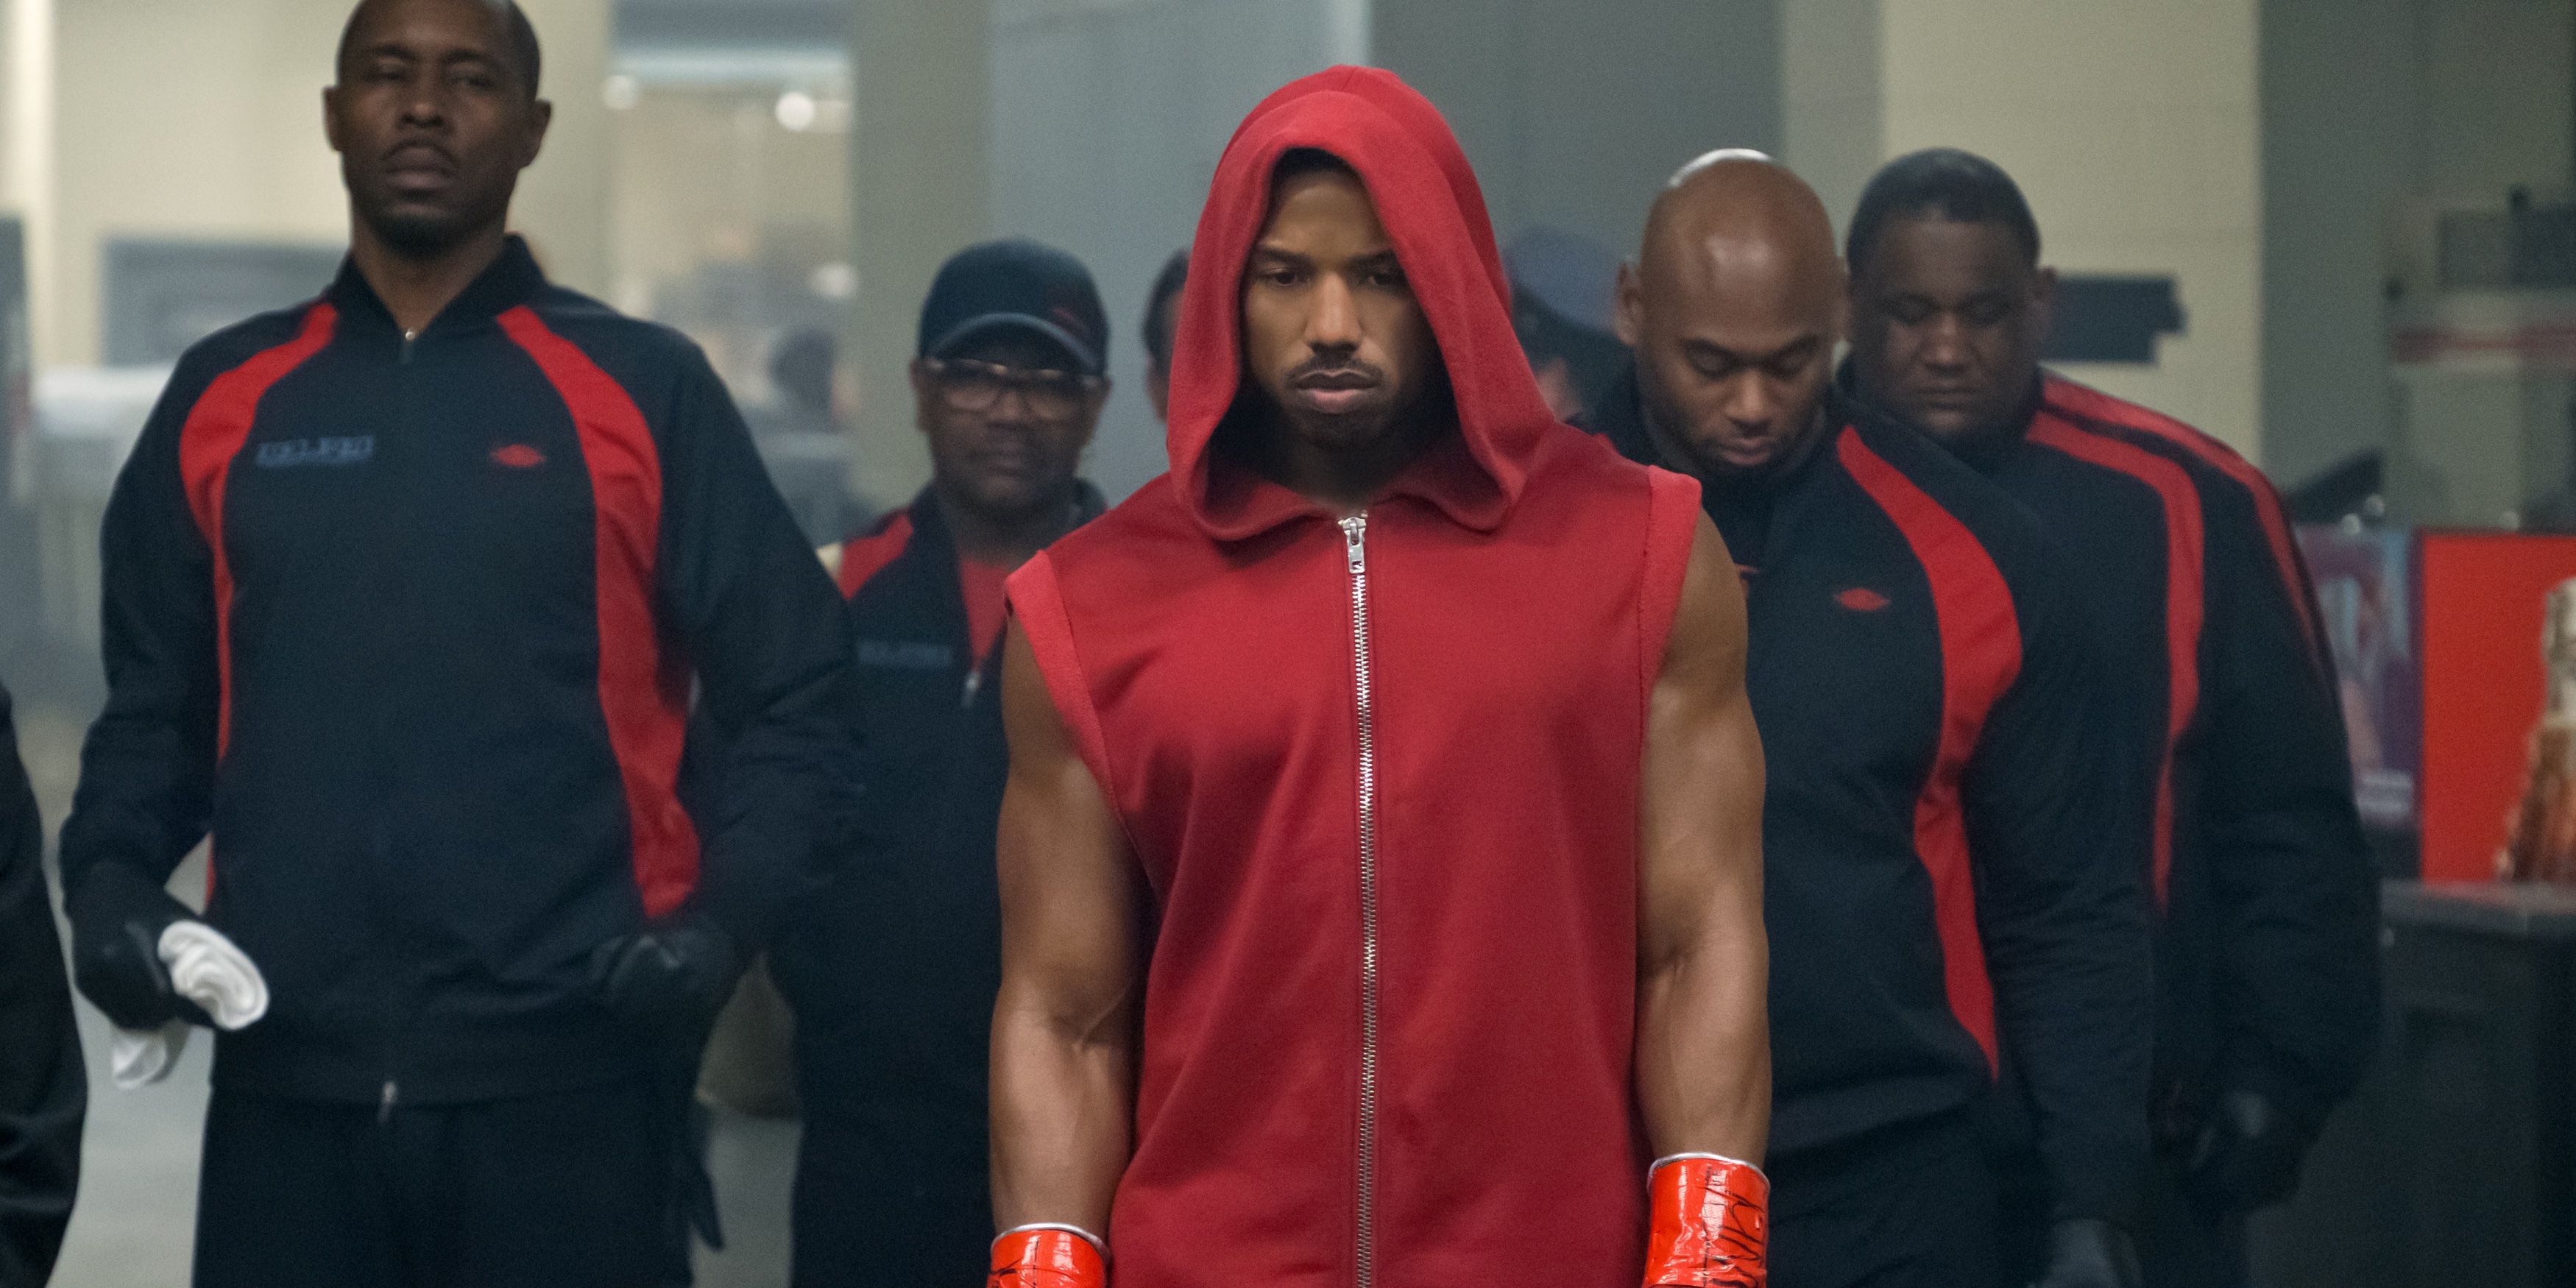 Michael B Jordan as Donnie Creed walking to a fight surrounded by his team.